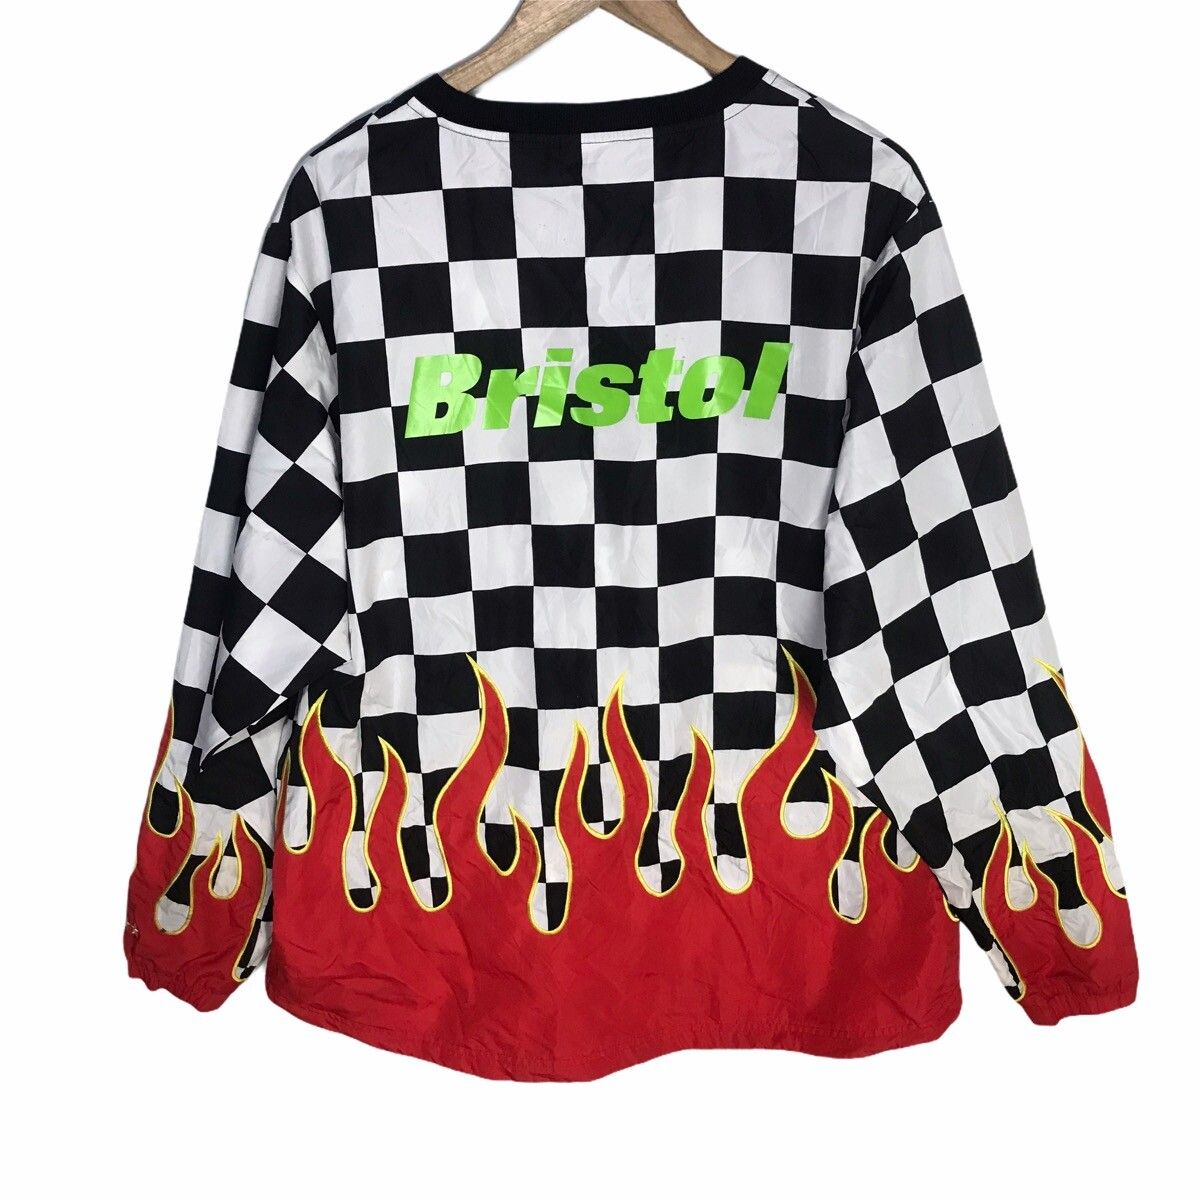 F.c real bristol checker flame piste large size - 2